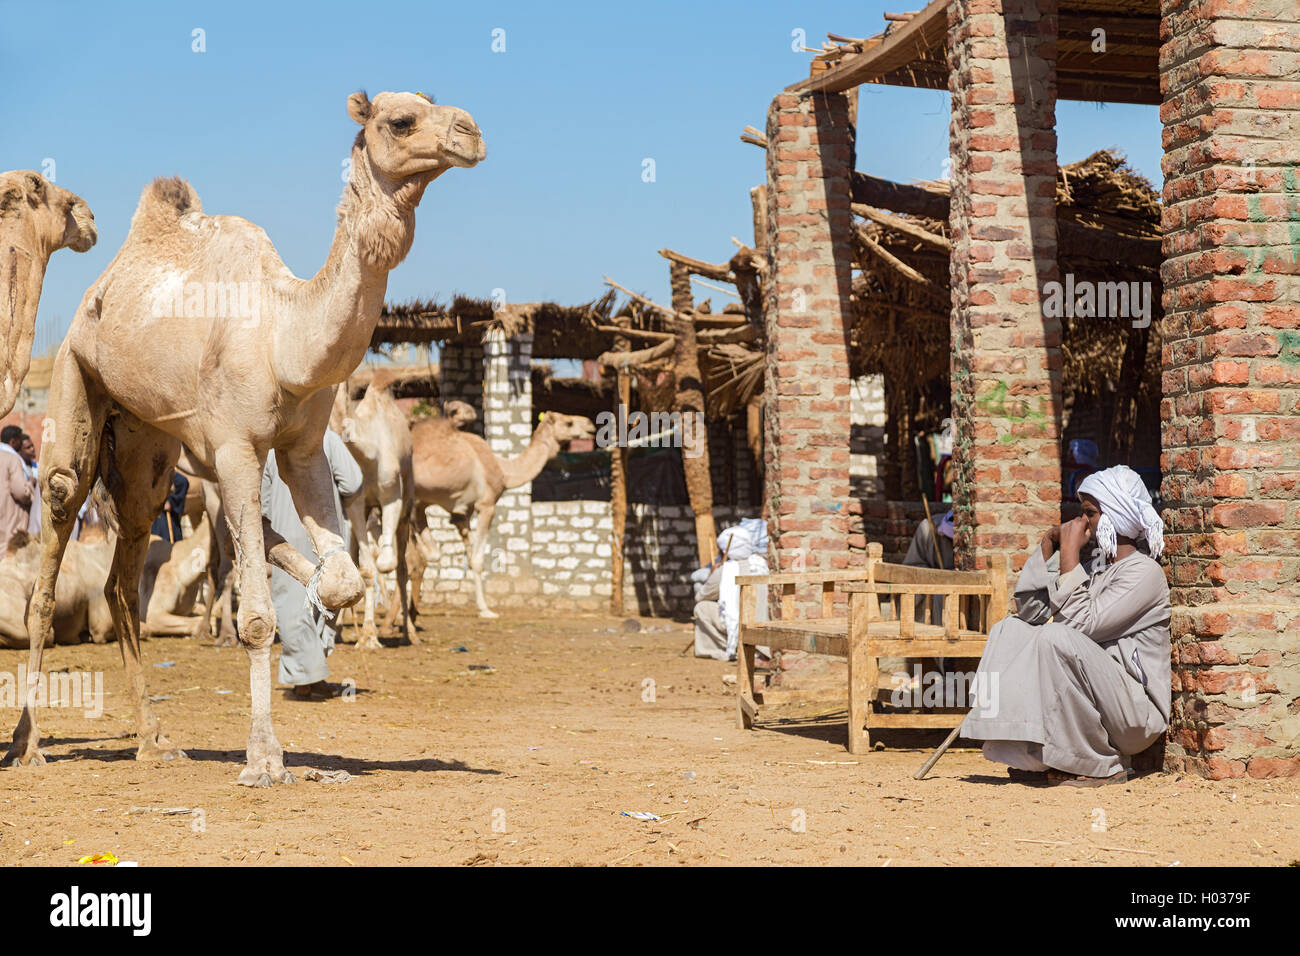 DARAW, EGYPT - FEBRUARY 6, 2016: Local camel salesman sitting by the ruined house at Camel market. Stock Photo